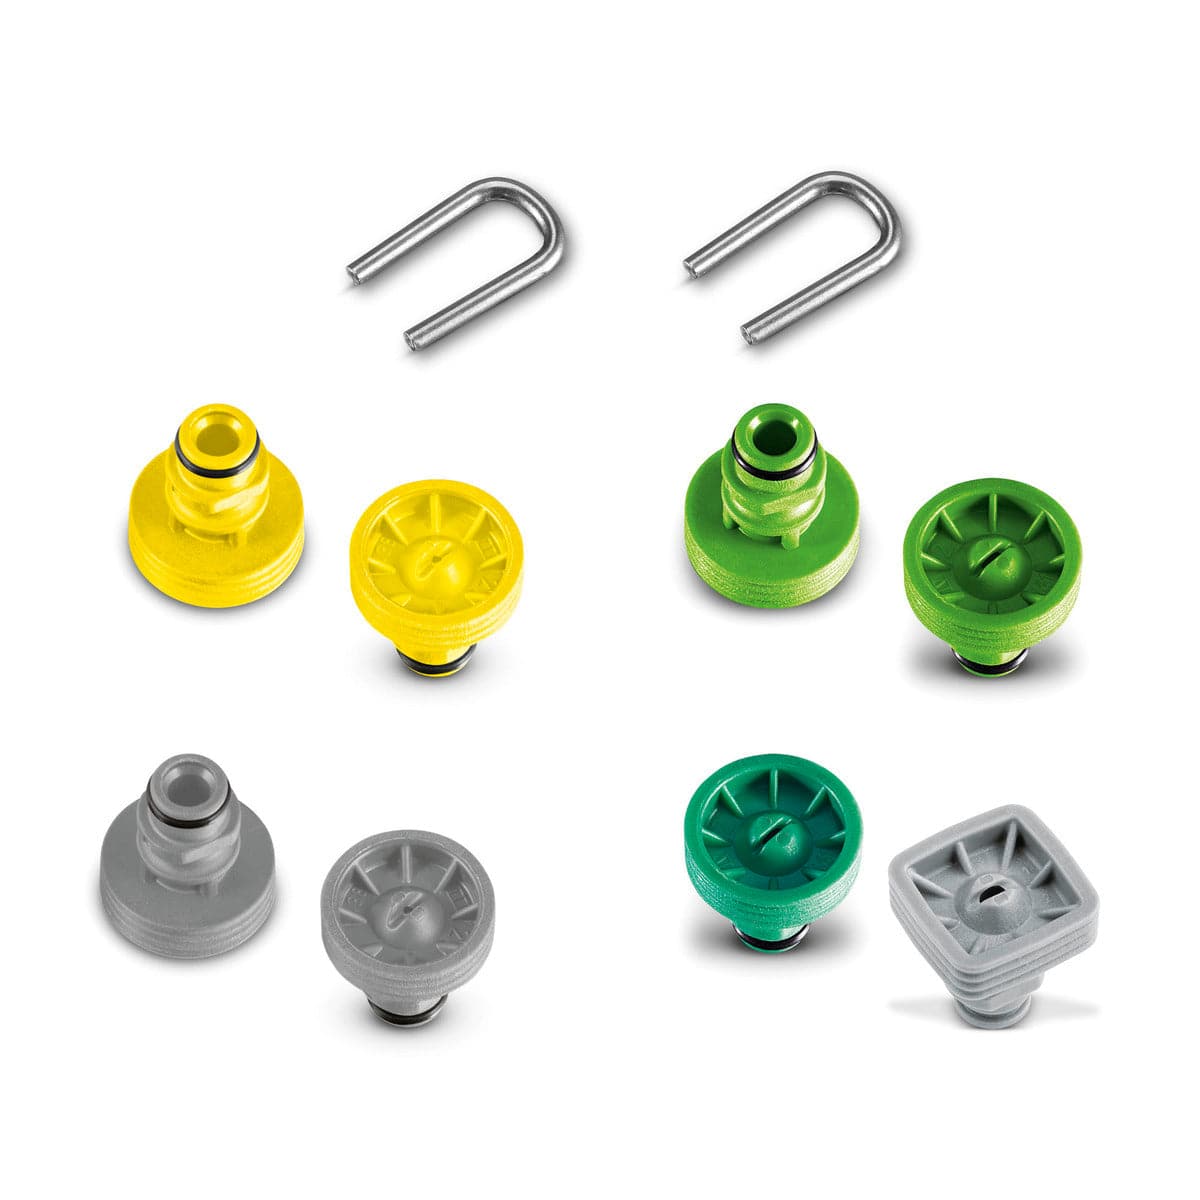 Karcher T-Racer Replacement Nozzles | Supply Master | Accra, Ghana Cleaning Equipment Accessories Buy Tools hardware Building materials